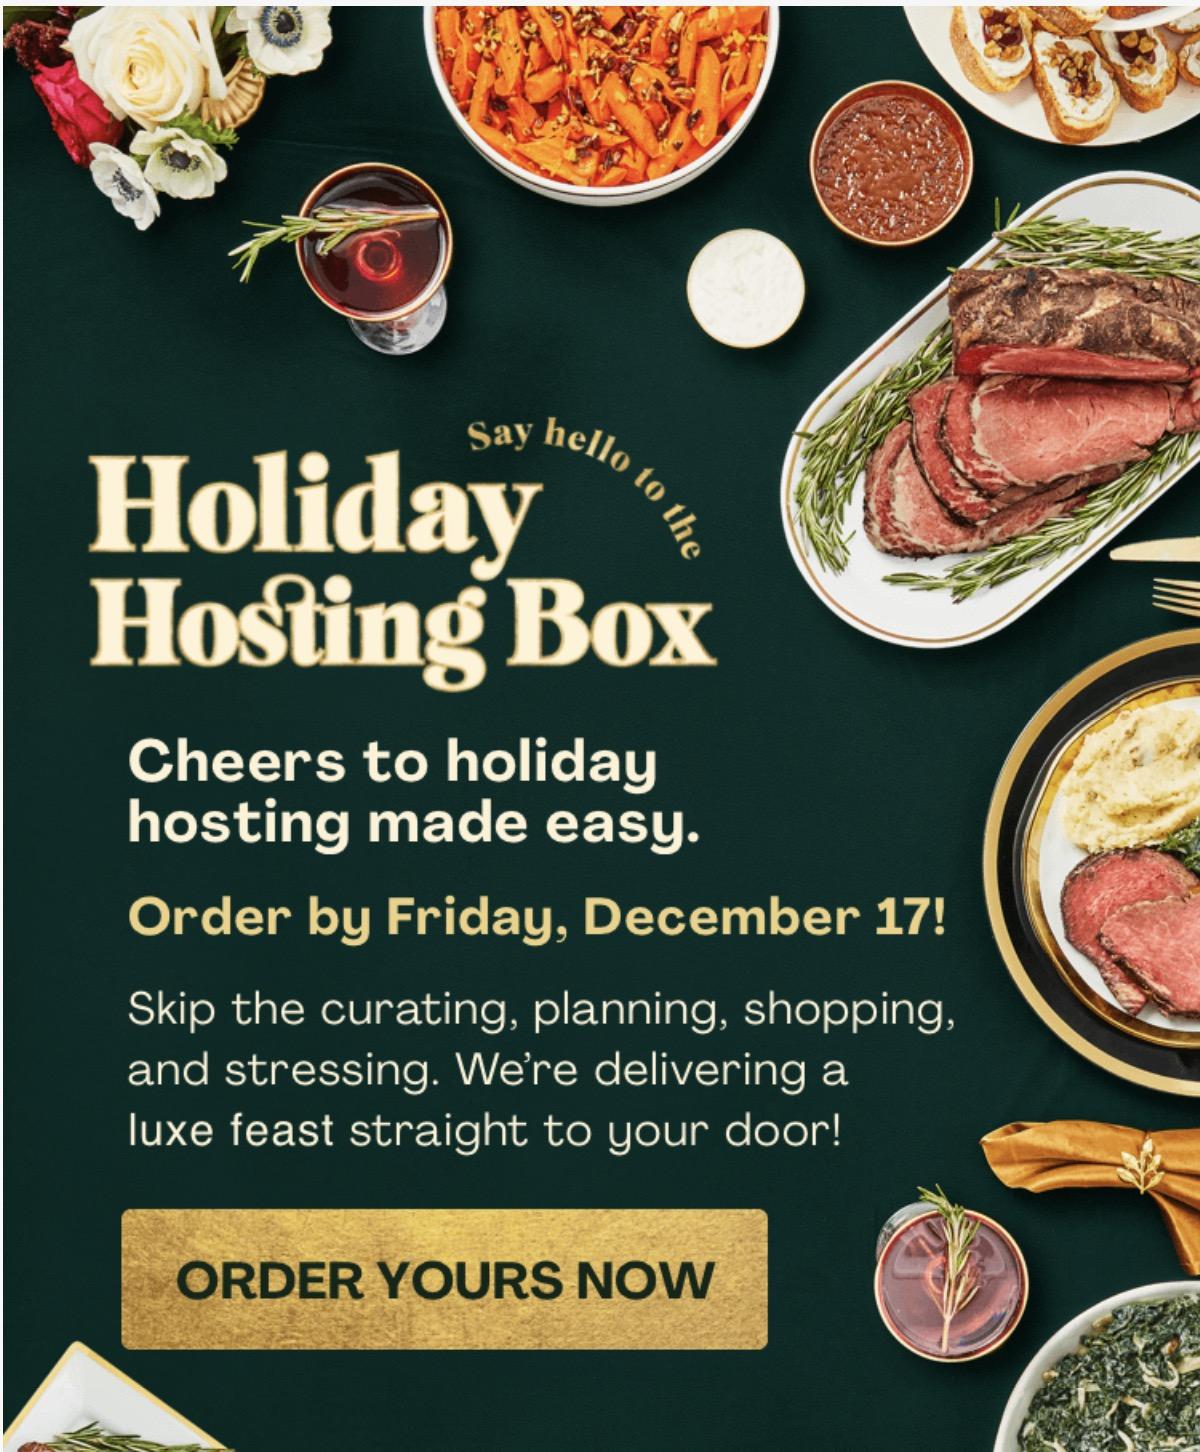 Let Hello Fresh Do The Work This Year With Their Holiday Hosting Box!